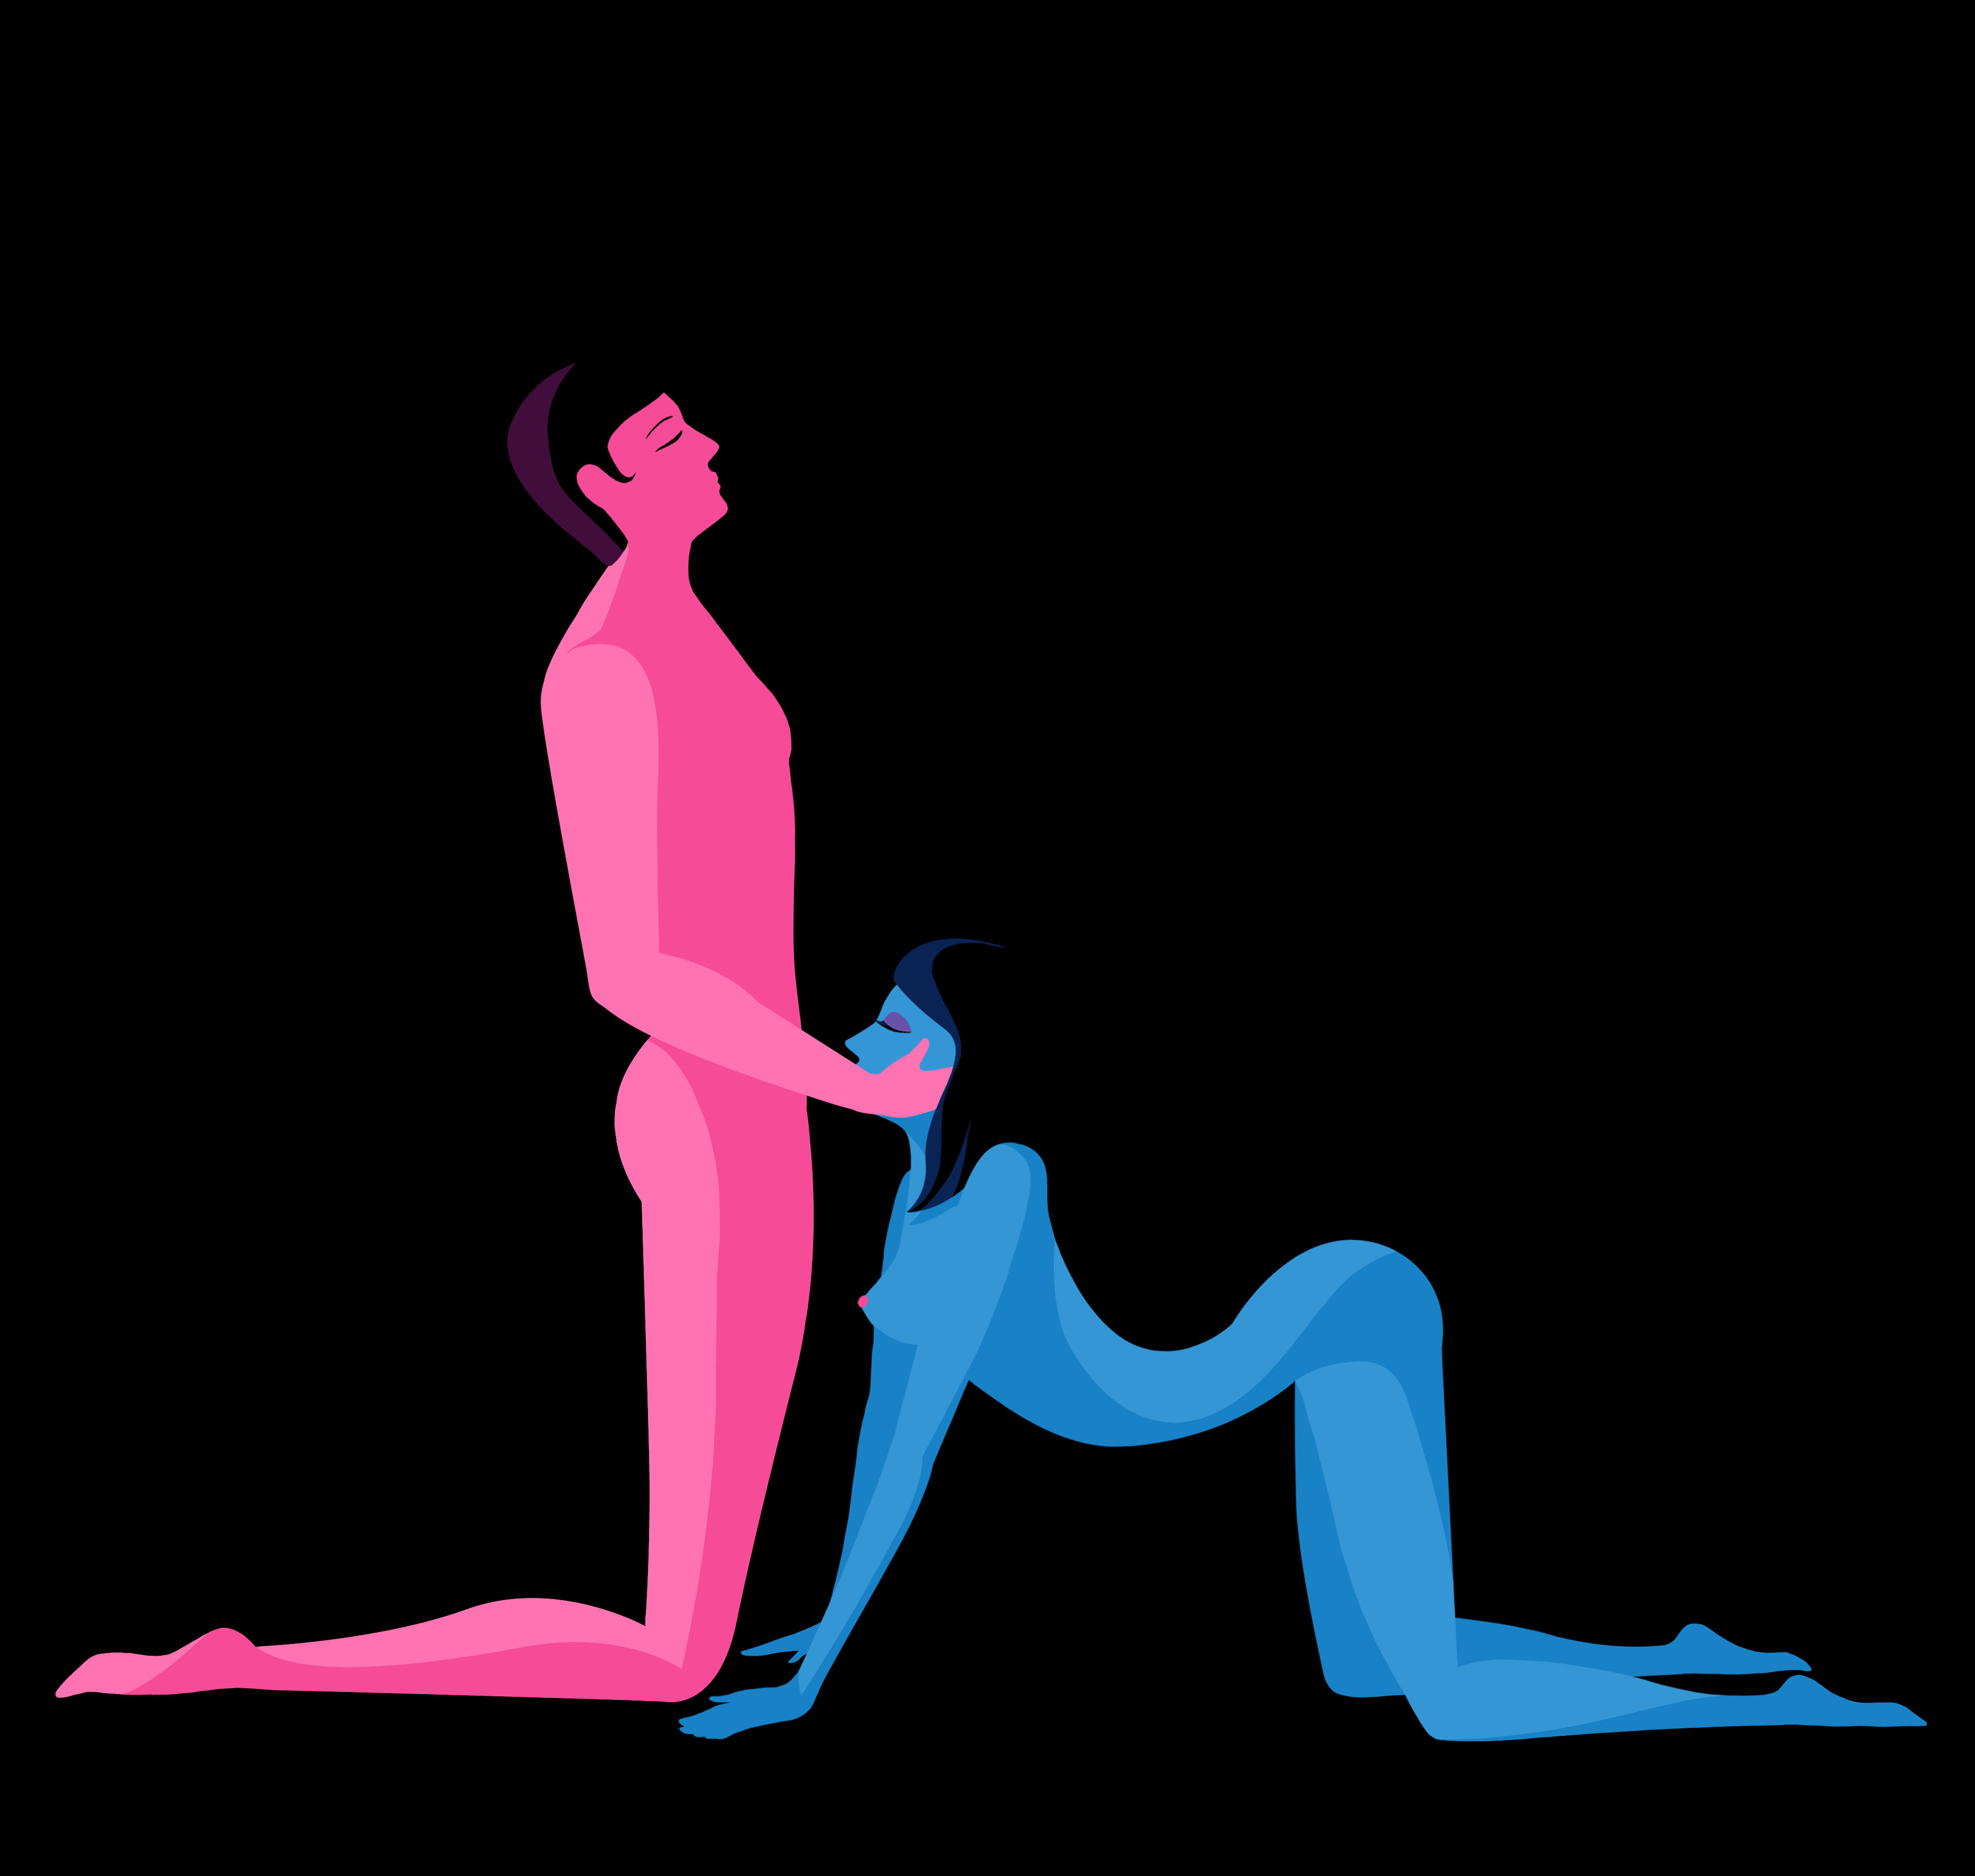 The Kama Sutra Tower Fun Sex Position Adult Game.